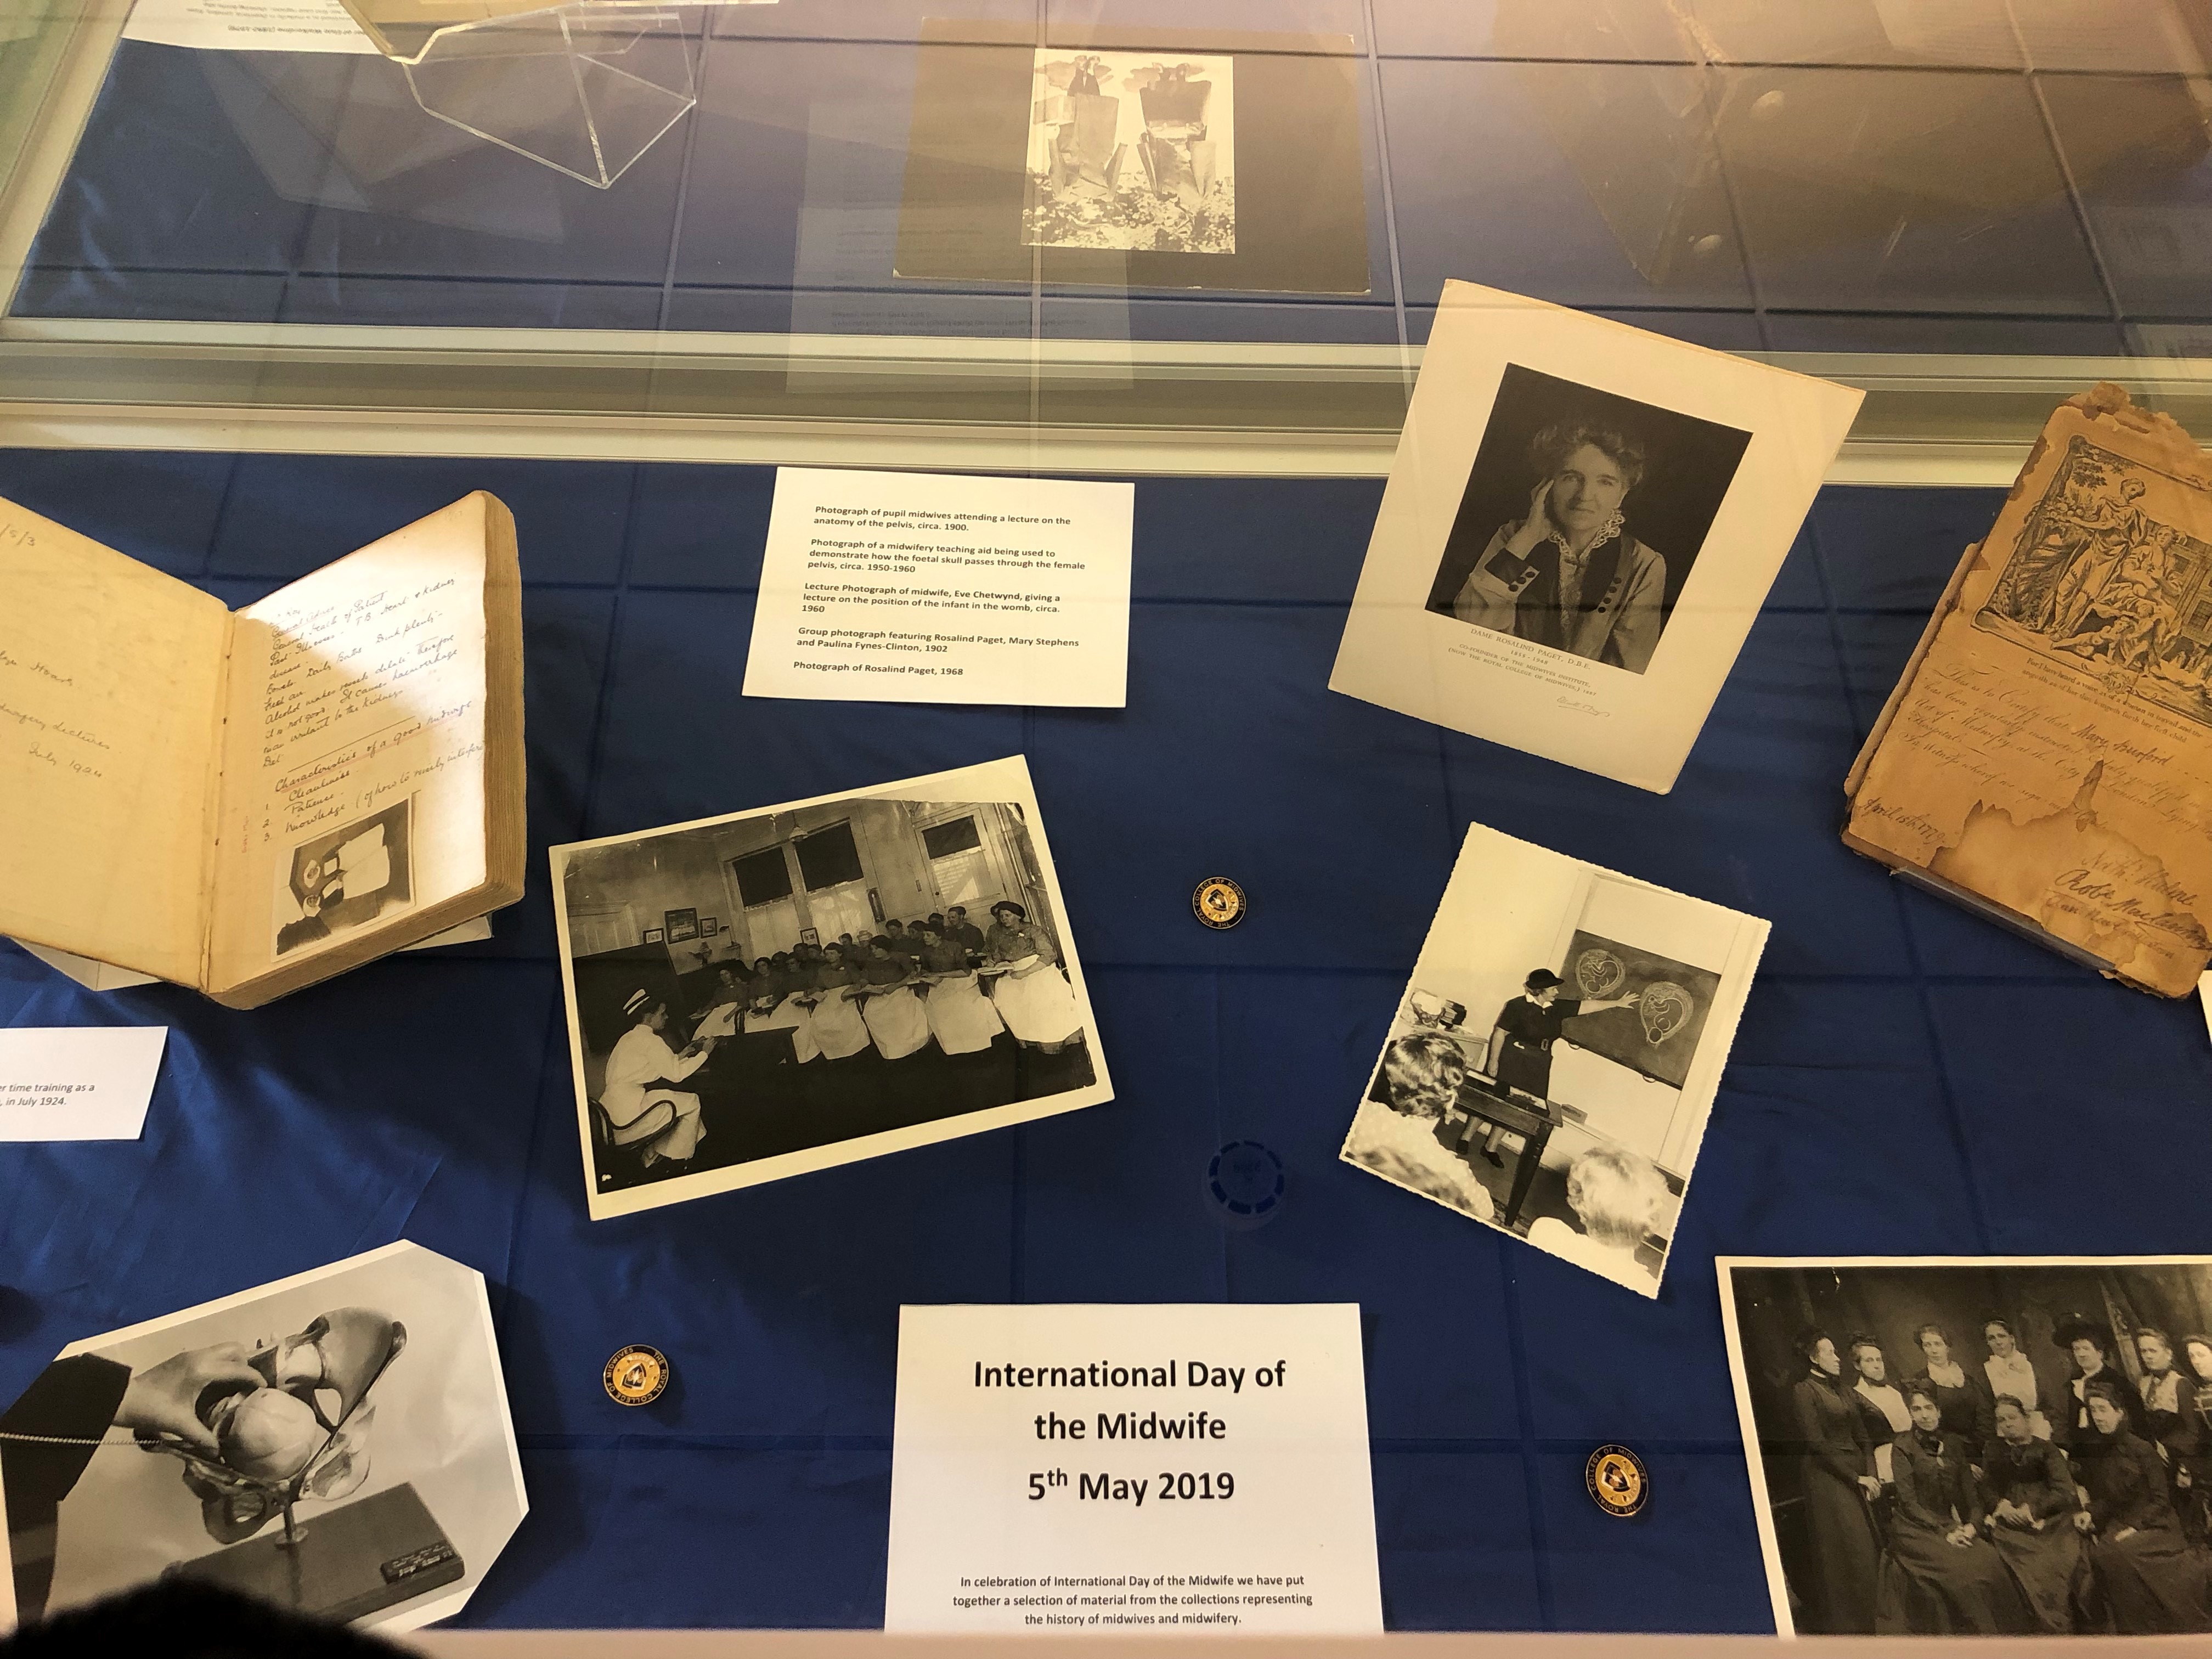 Items from the current library display: International Day of the Midwife, 5th May 2019